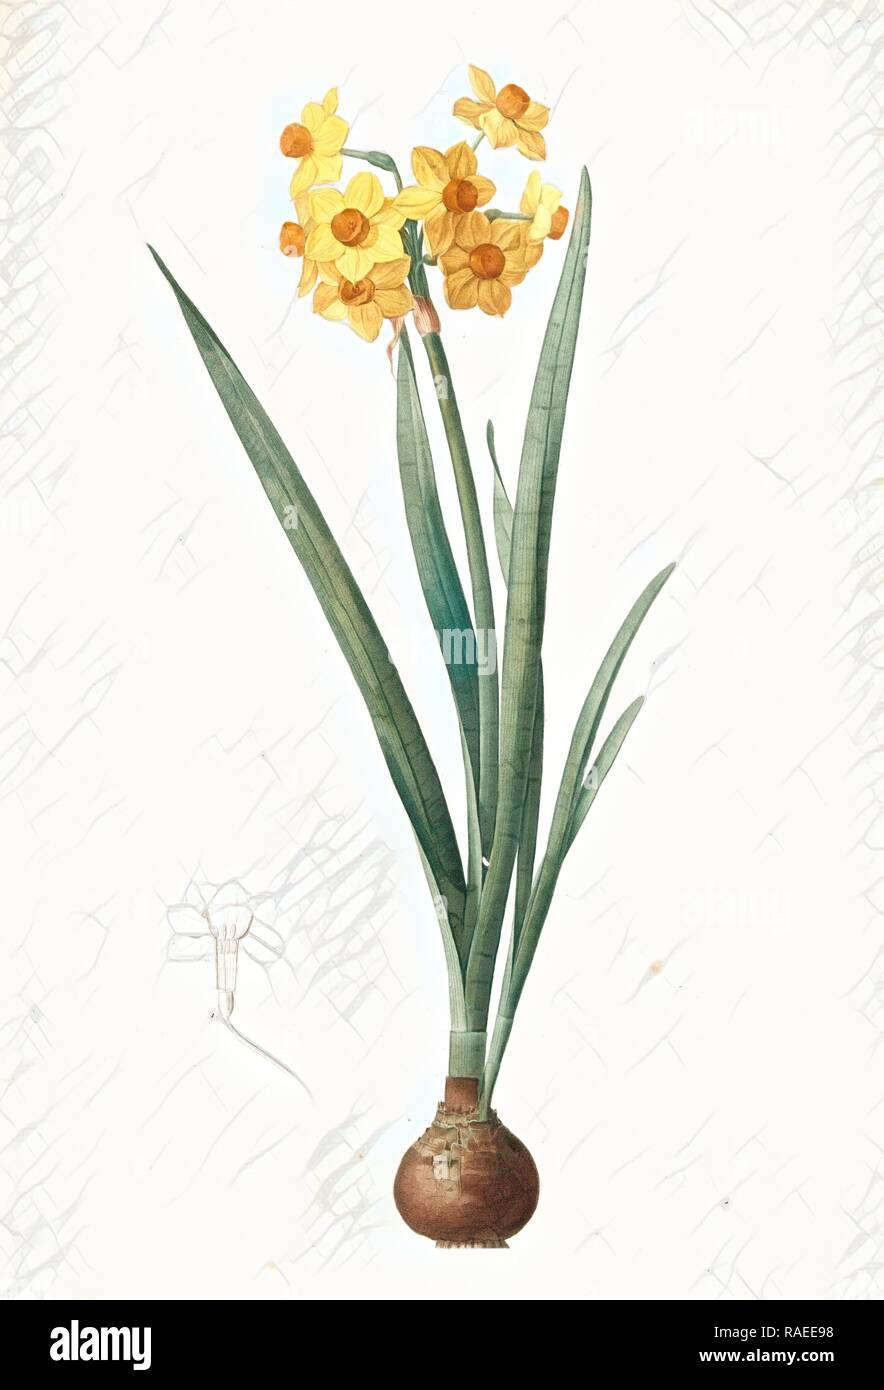 Narcissus Tazetta, Narcissus dubius, Narcisse douteux, Polyanthes Narcissus, cream narcissus, bunch flowered reimagined Stock Photo